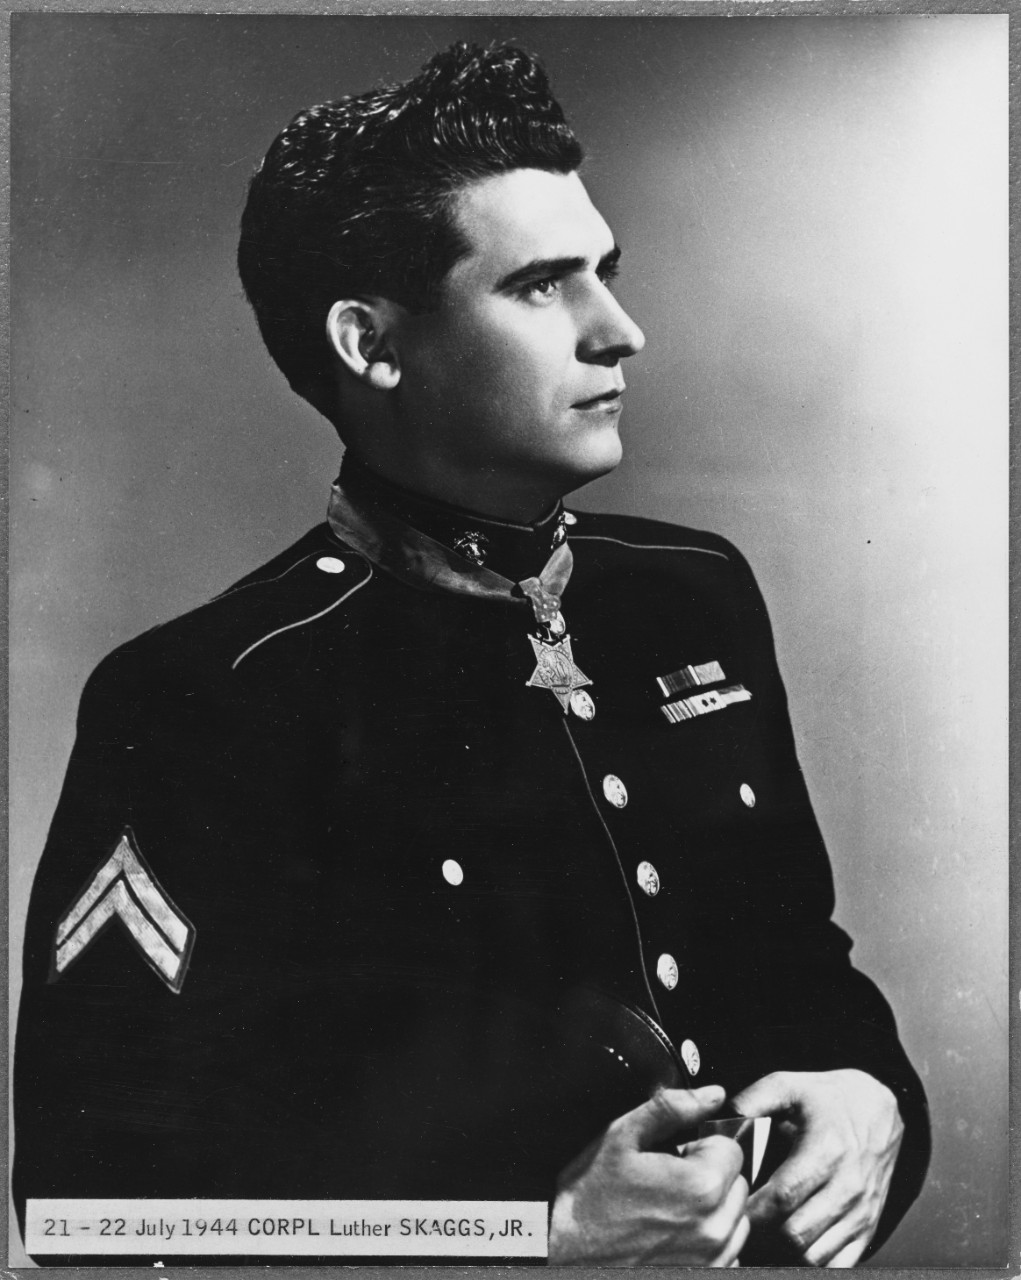 Photo #: NH 106453  Corporal Luther Skaggs, Jr., USMCR